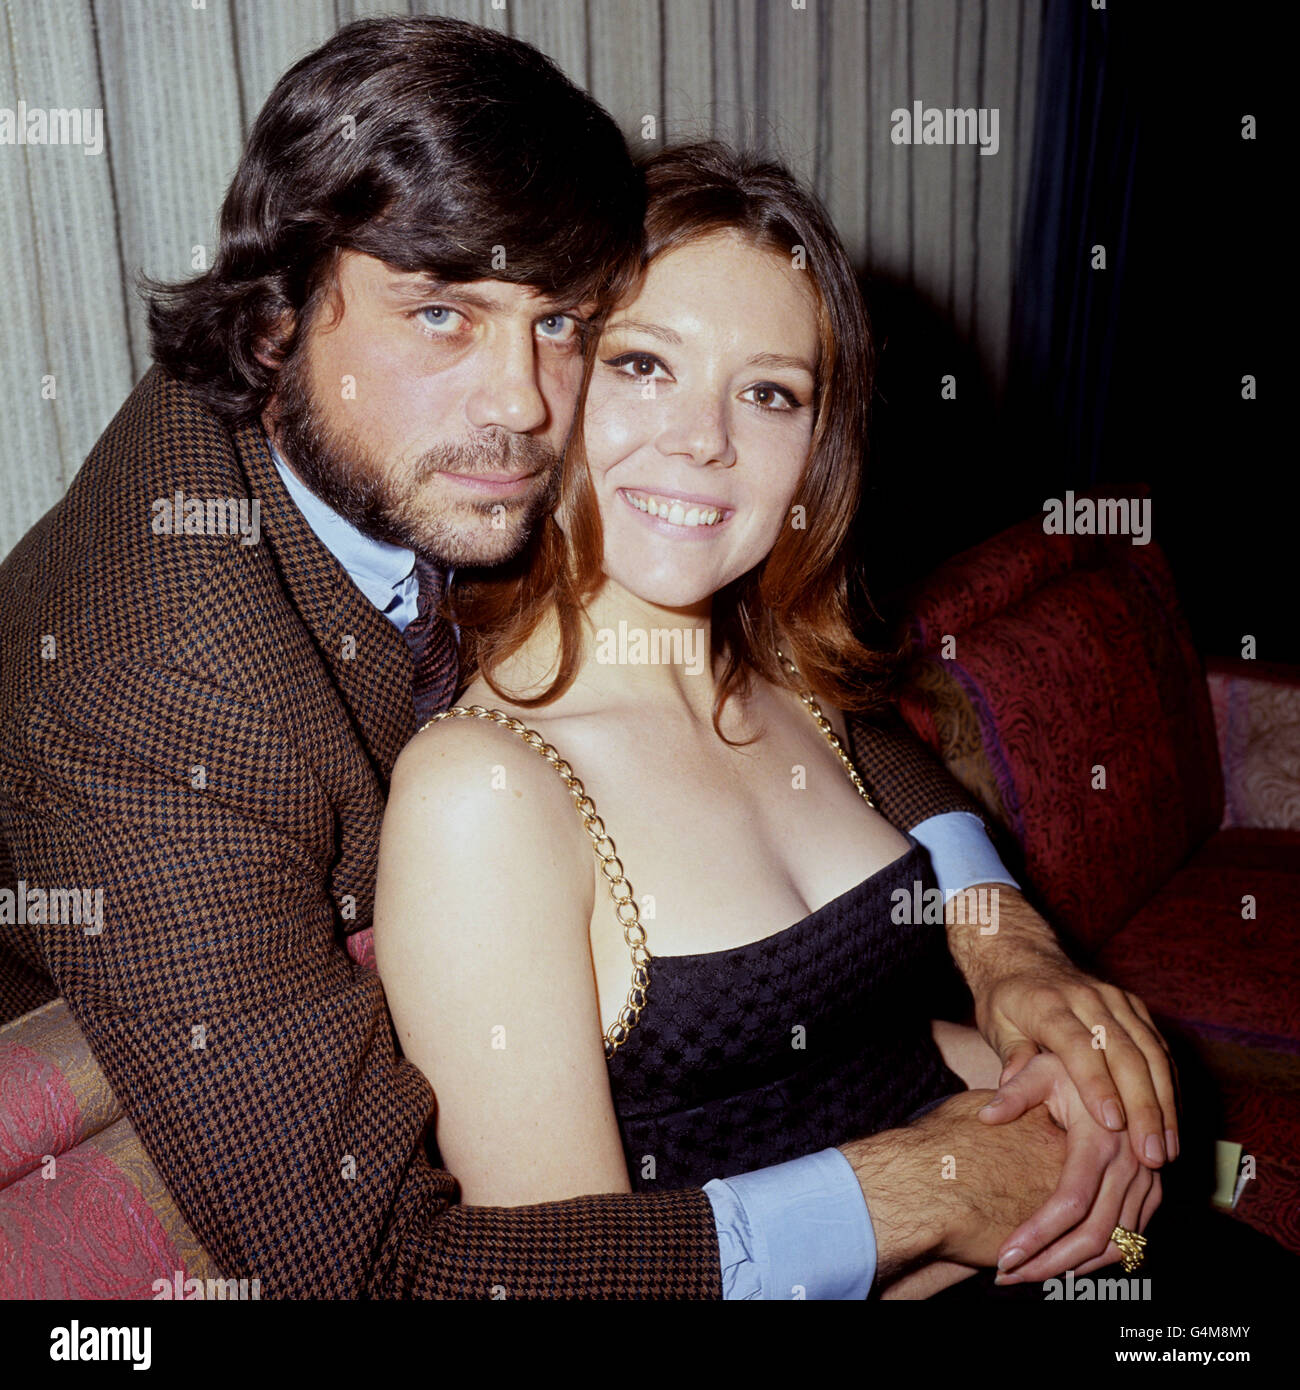 Oliver Reed embraces Diana Rigg at a London Hilton Hotel press reception for their latest film, 'The Assassination Bureau'. Stock Photo